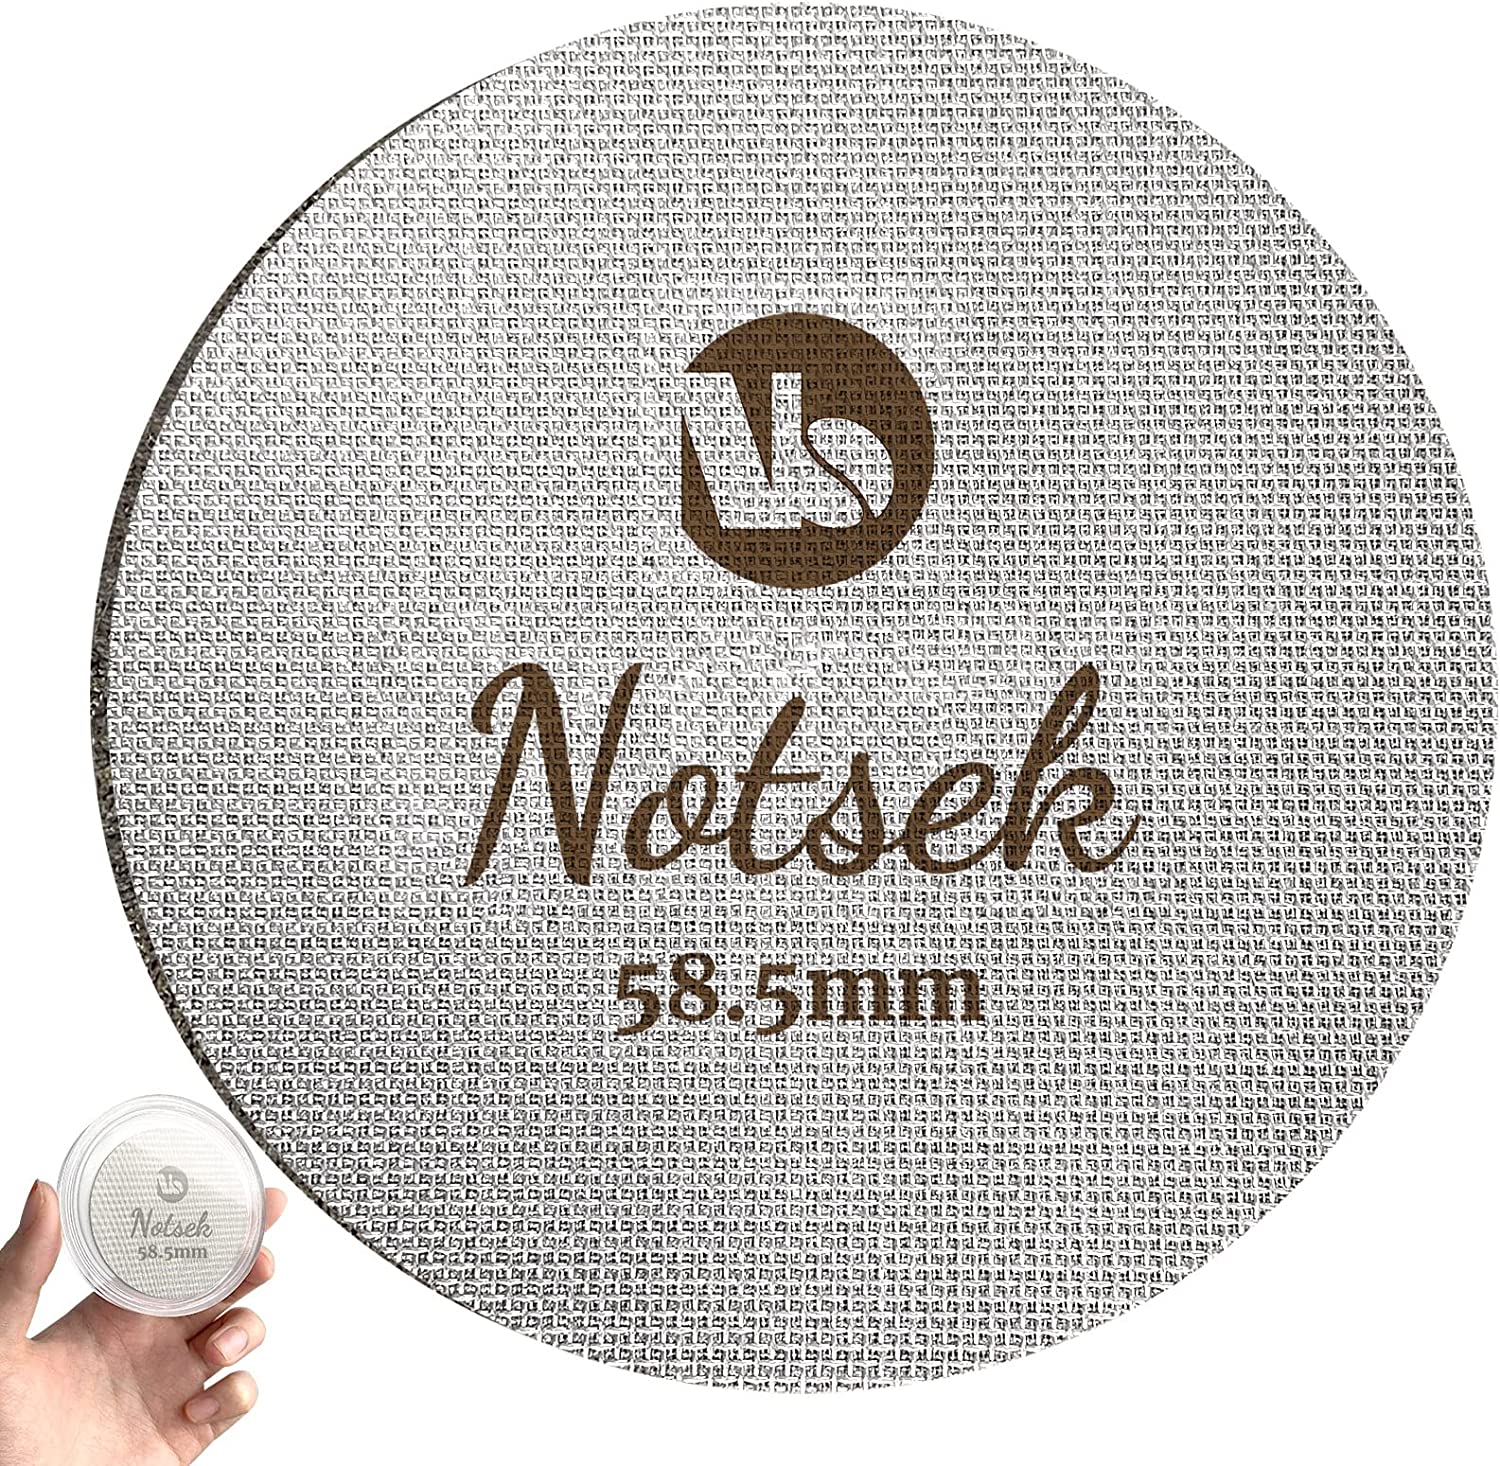 NOTSEK 58.5 mm Coffee Puck Screen with Acrylic Storage Box, Reusable Espresso Puck Screen/Puck Filter/Puck Strainer, 316 Stainless Steel, 1.7 mm Thickness, 150 μm, Coffee Filter Bottom Shower Strainer